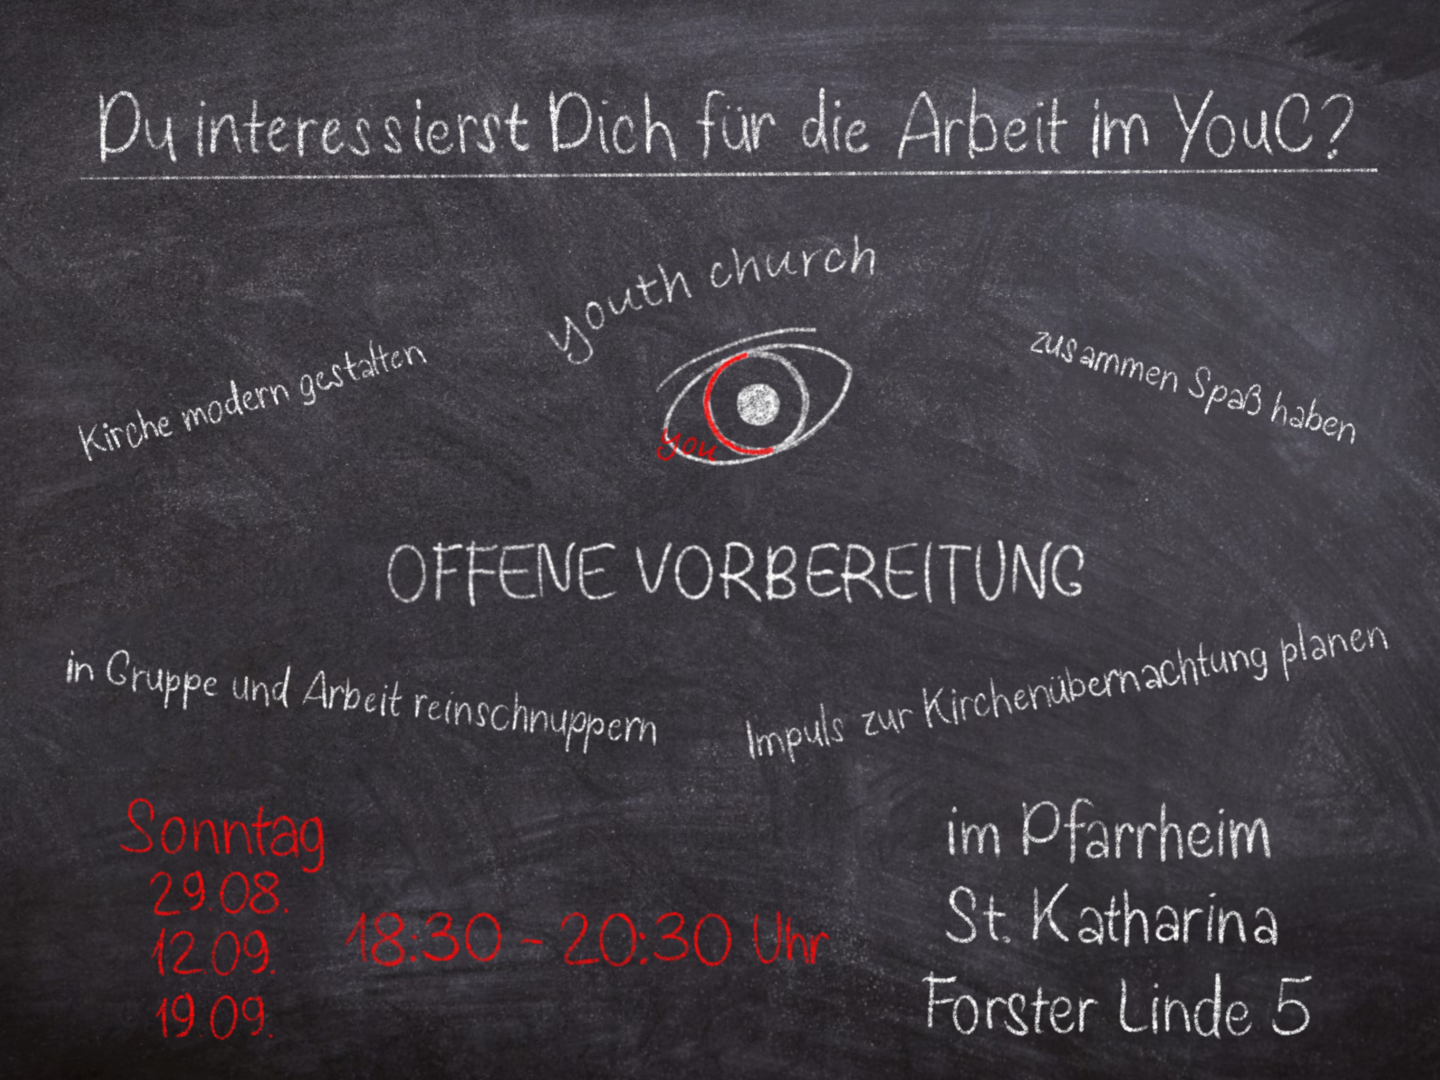 Flyer_OffeneVorbereitung (c) YouC